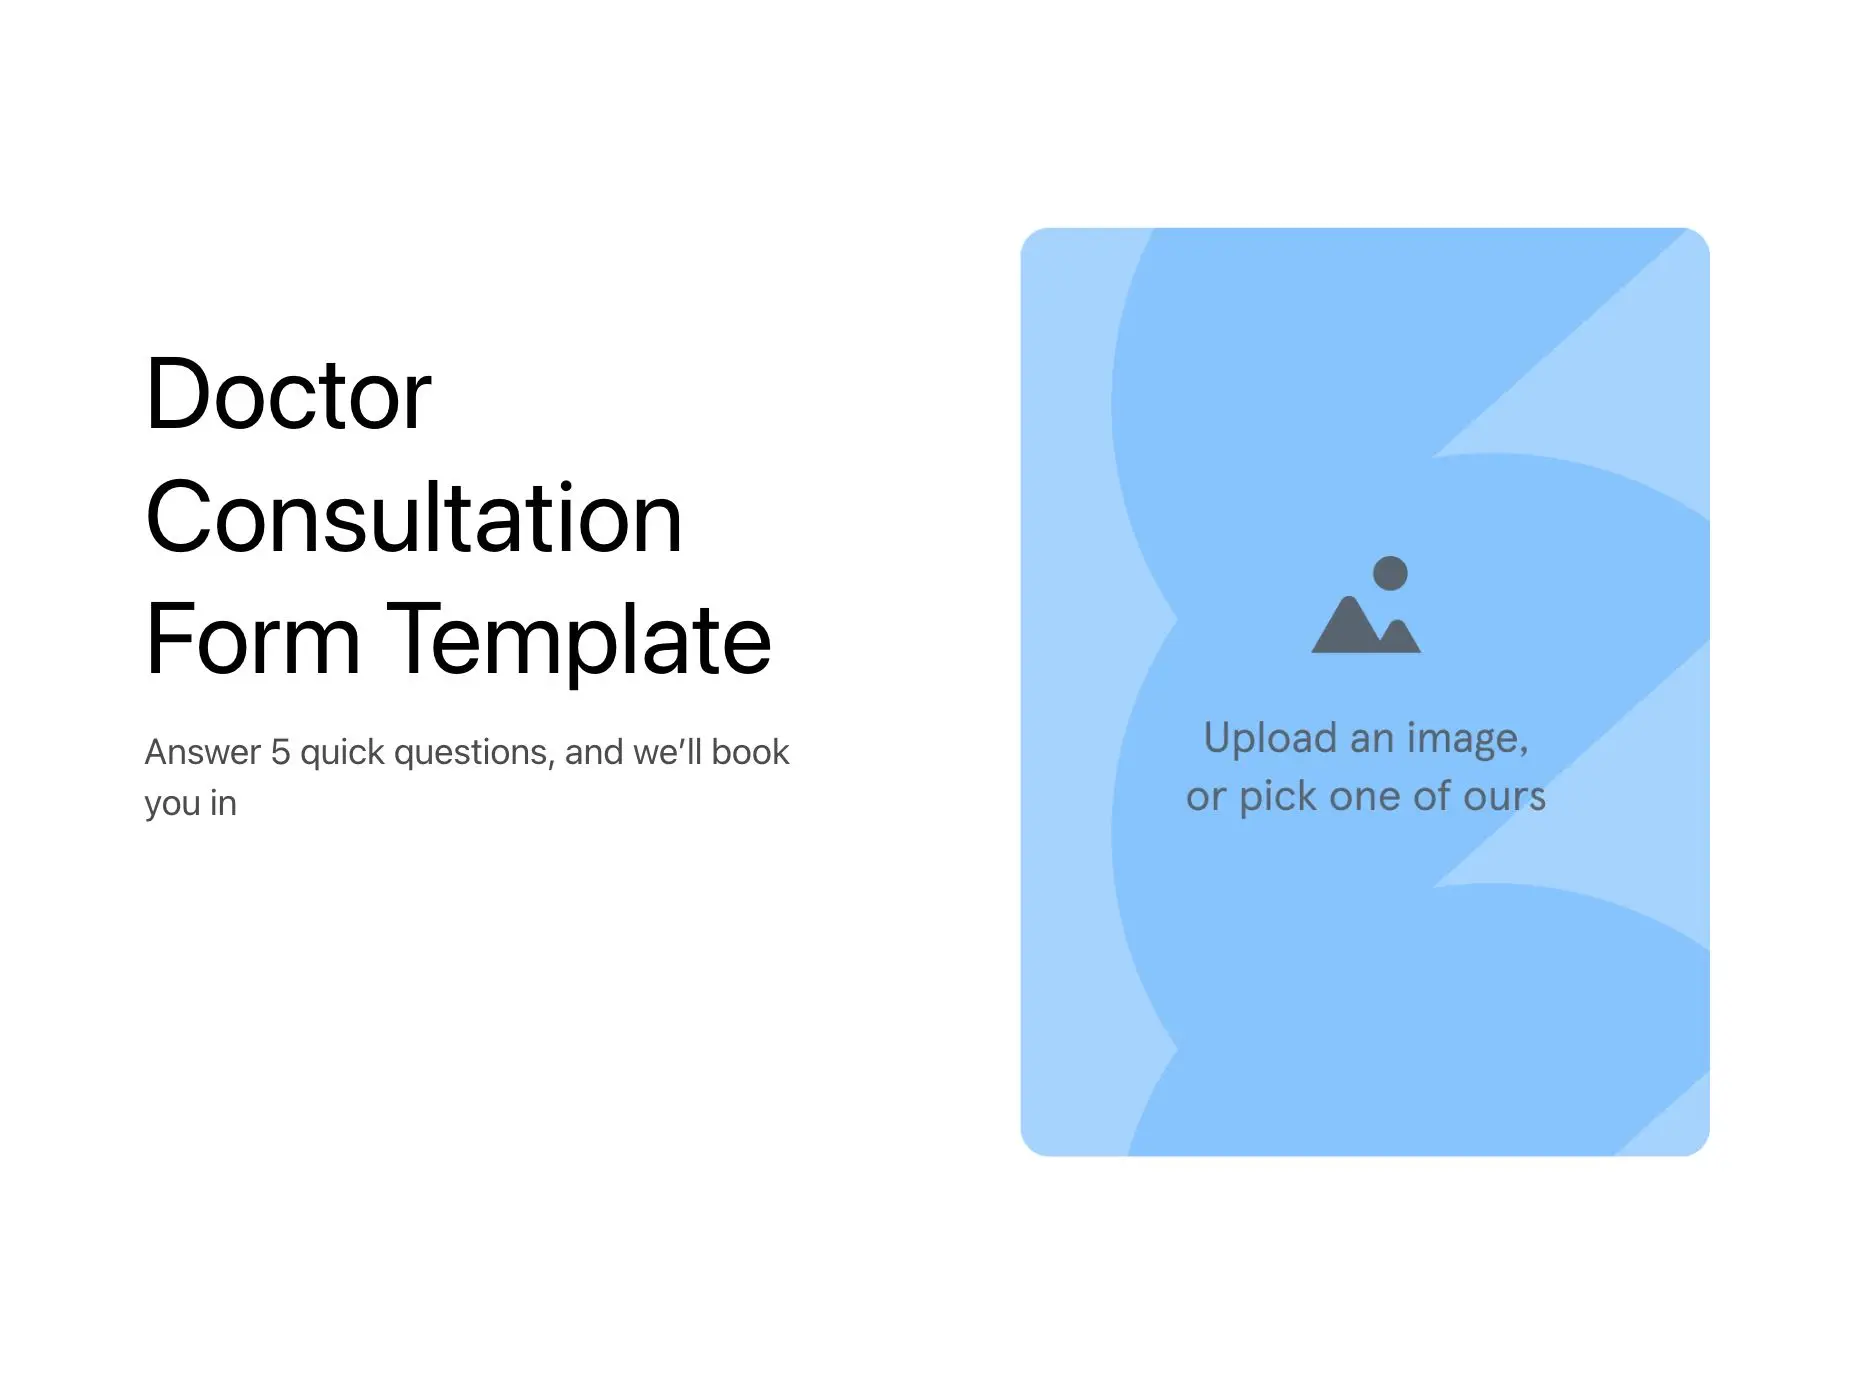 Doctor Consultation Form Template Hero